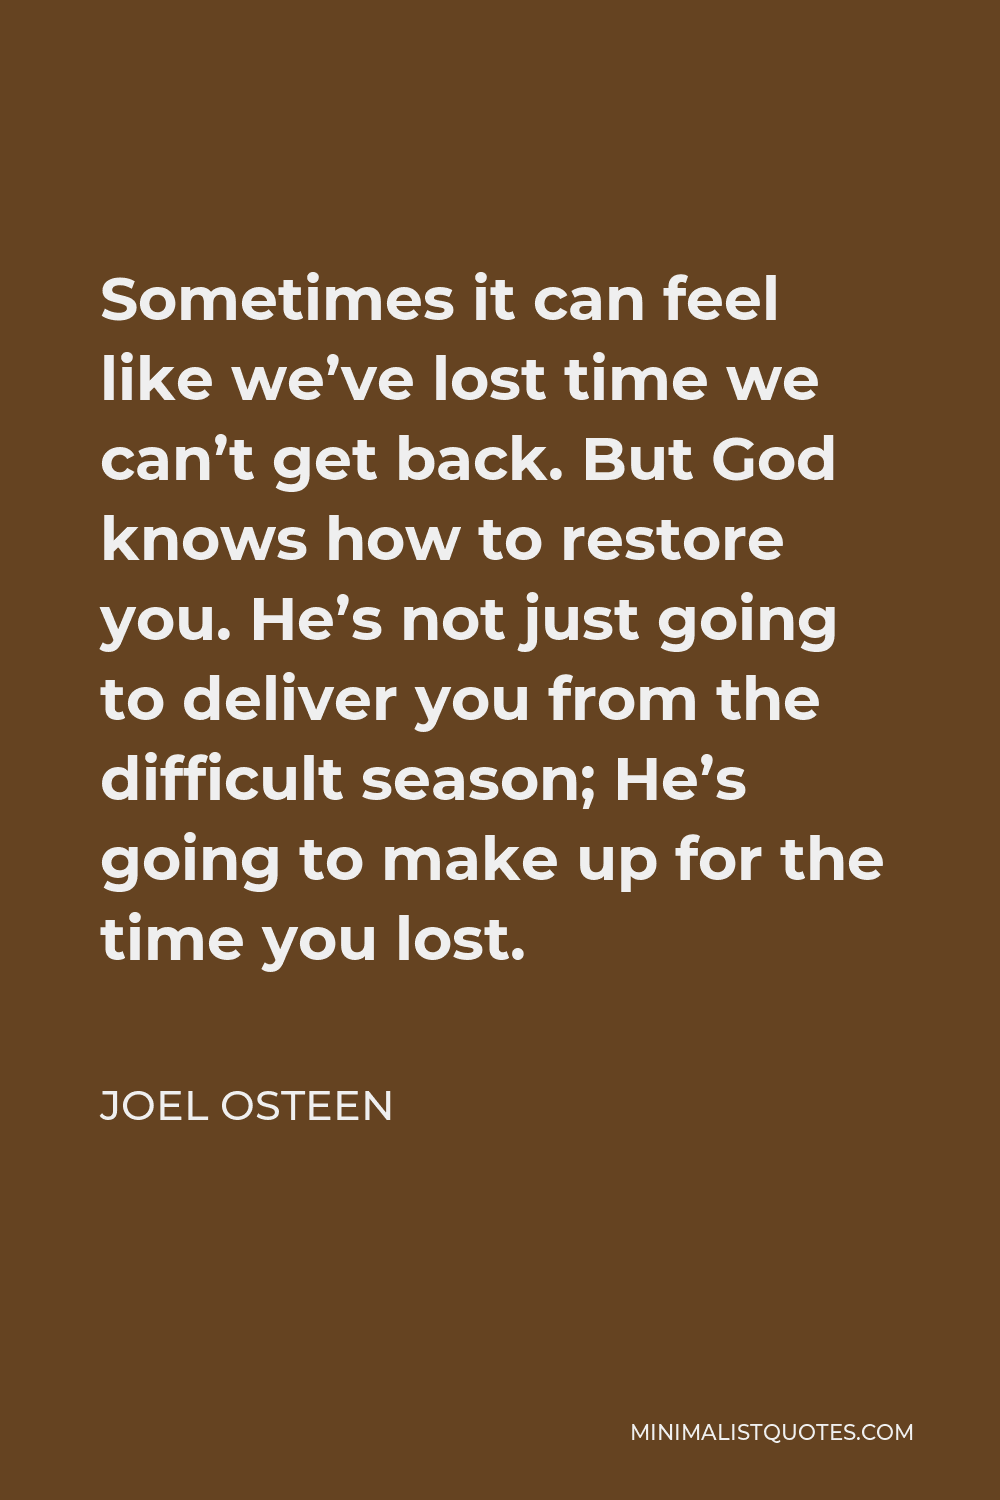 Joel Osteen Quote - Sometimes it can feel like we’ve lost time we can’t get back. But God knows how to restore you. He’s not just going to deliver you from the difficult season; He’s going to make up for the time you lost.